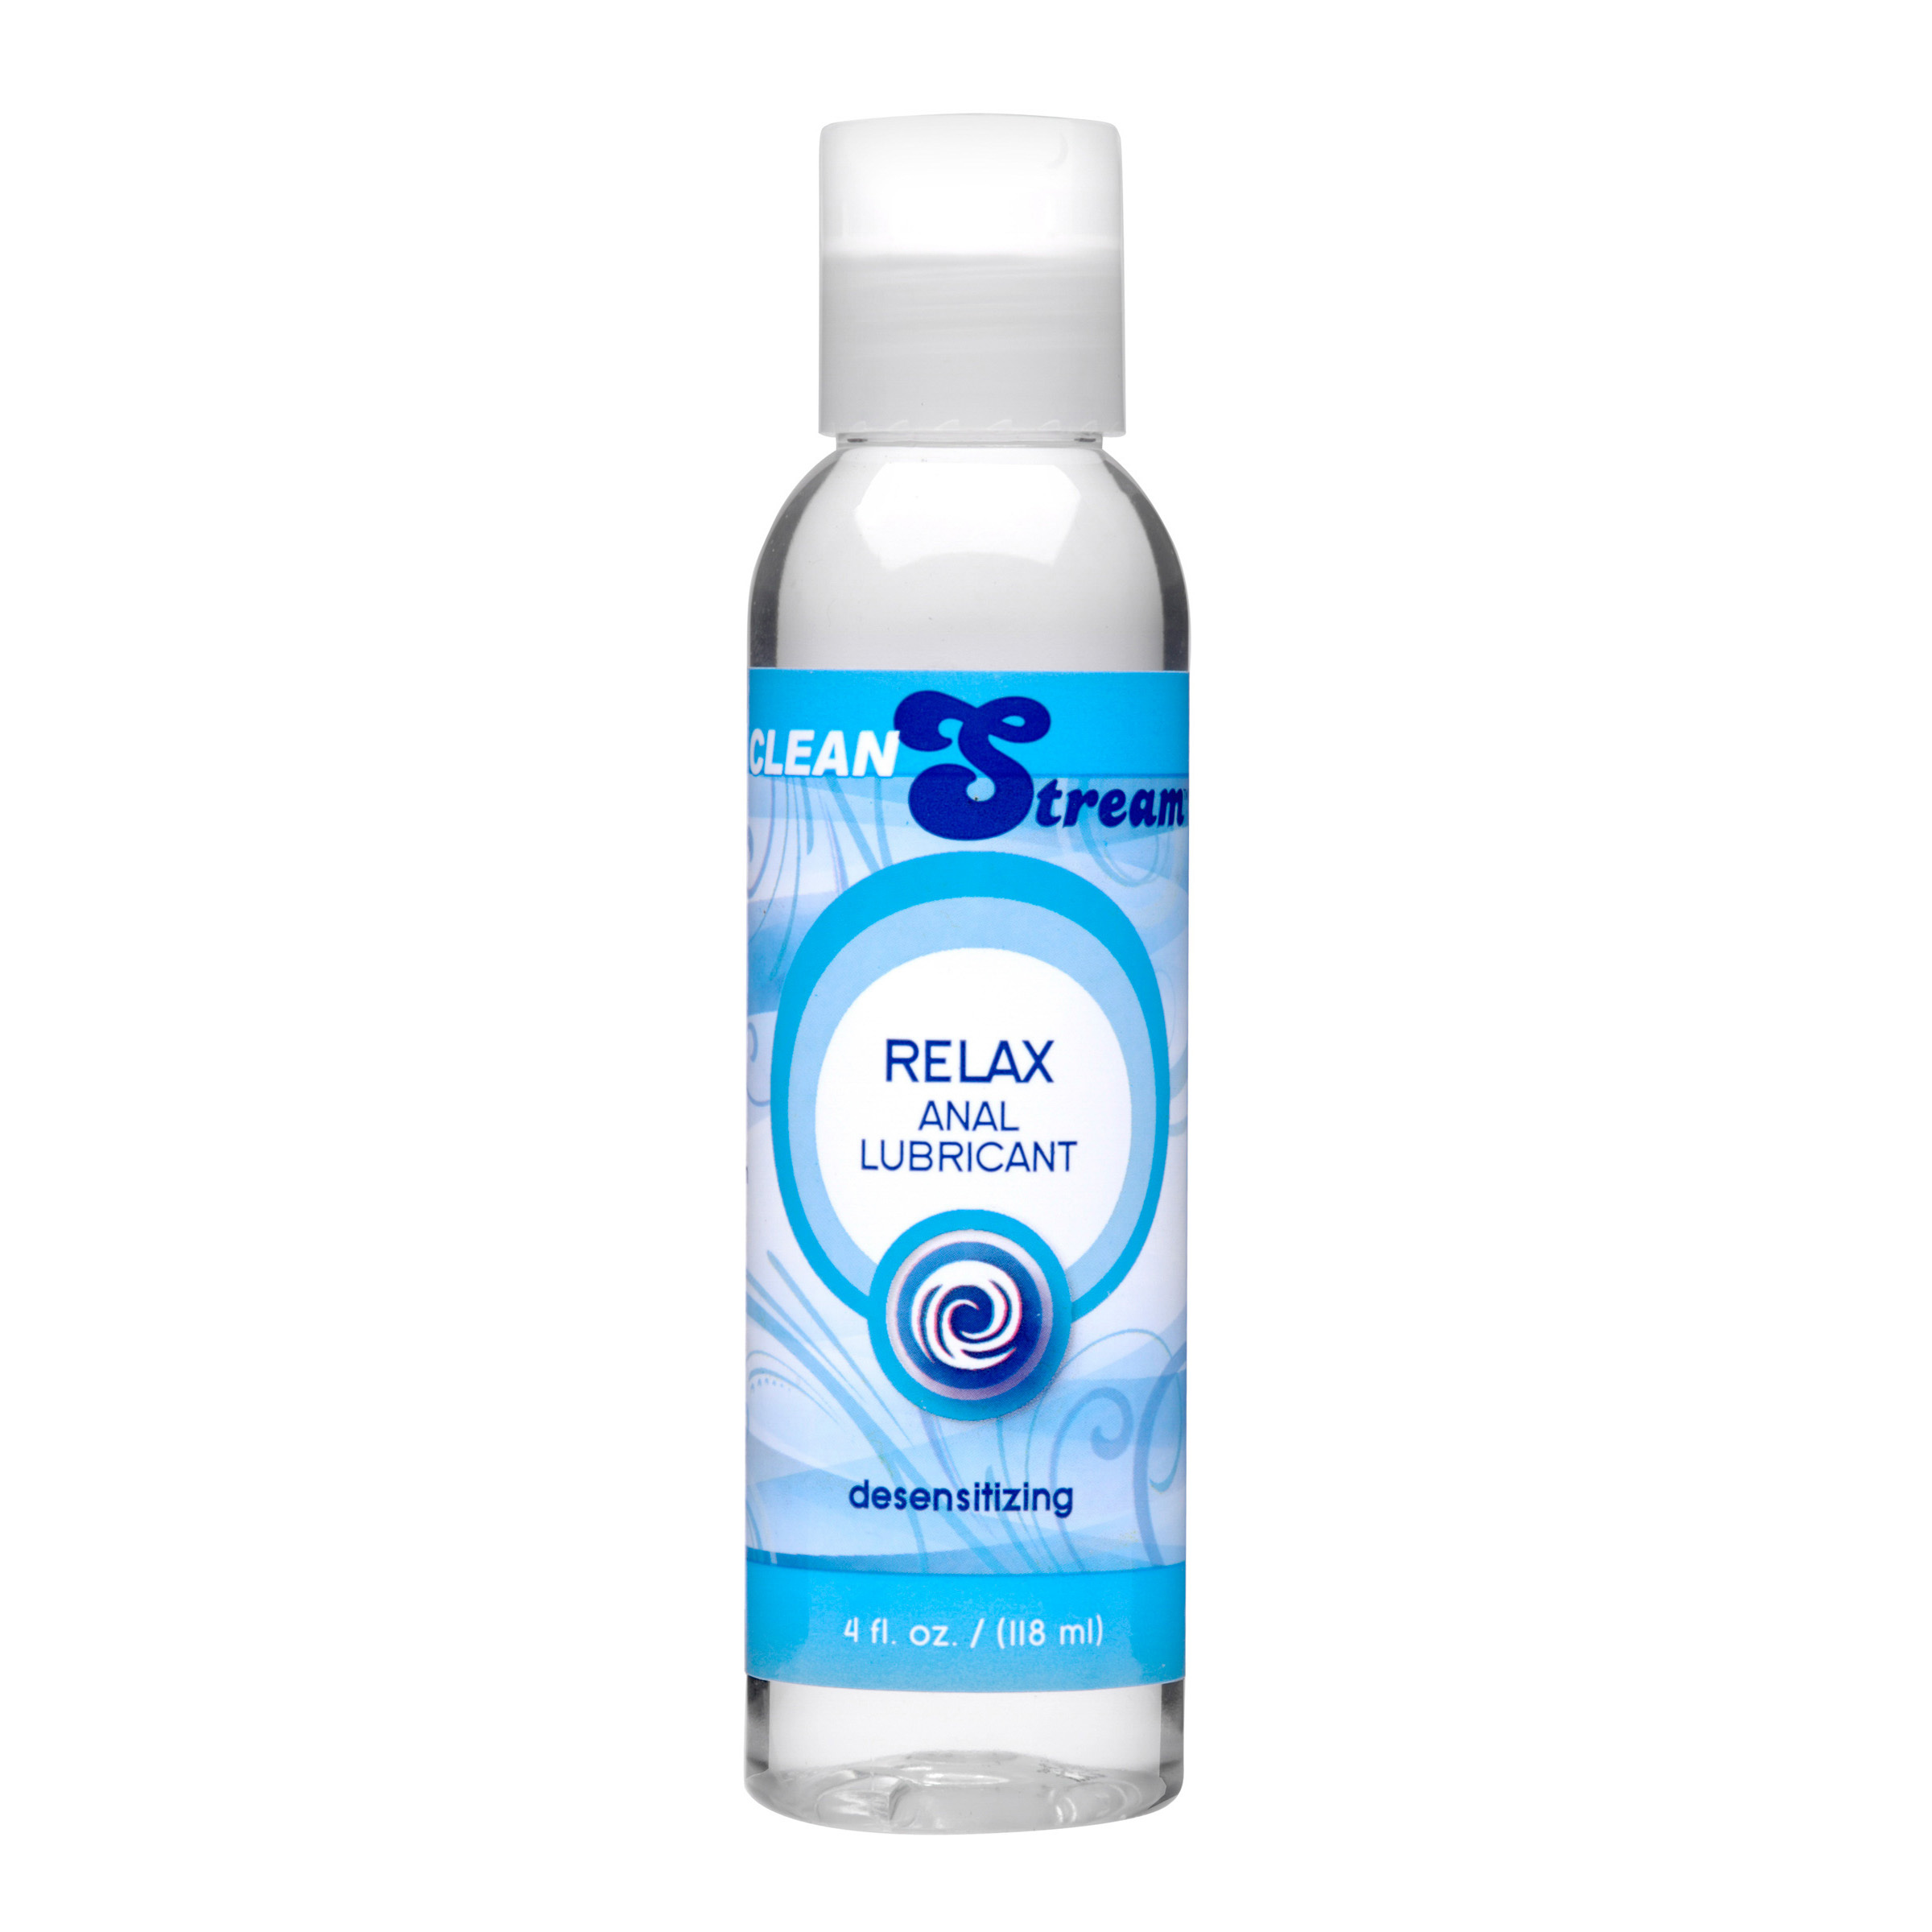 CleanStream+Relax+Desensitizing+Anal+Lube+4+oz